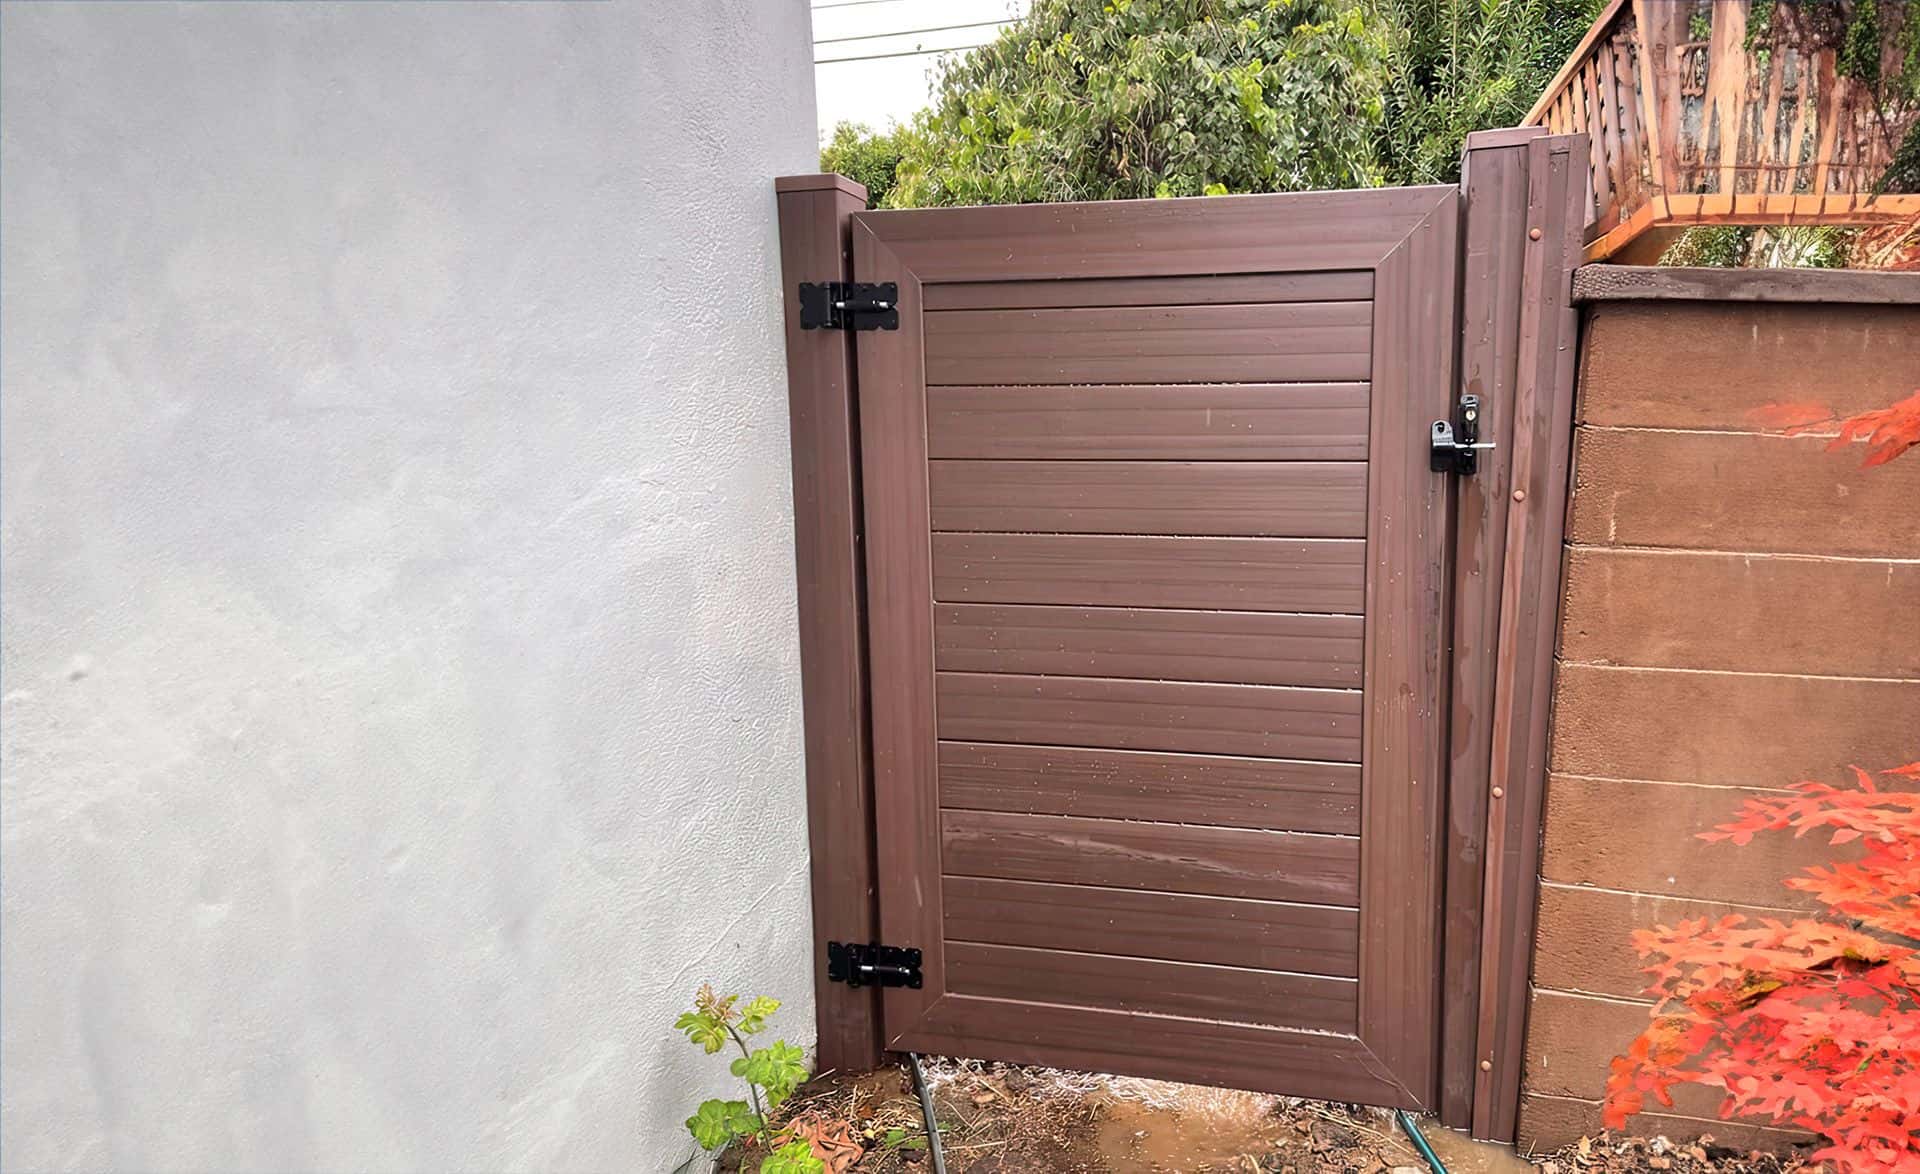 Dark sequoia vinyl fence gate with black hinges next to red brick boundary wall, leading into backyard with garden and trees.